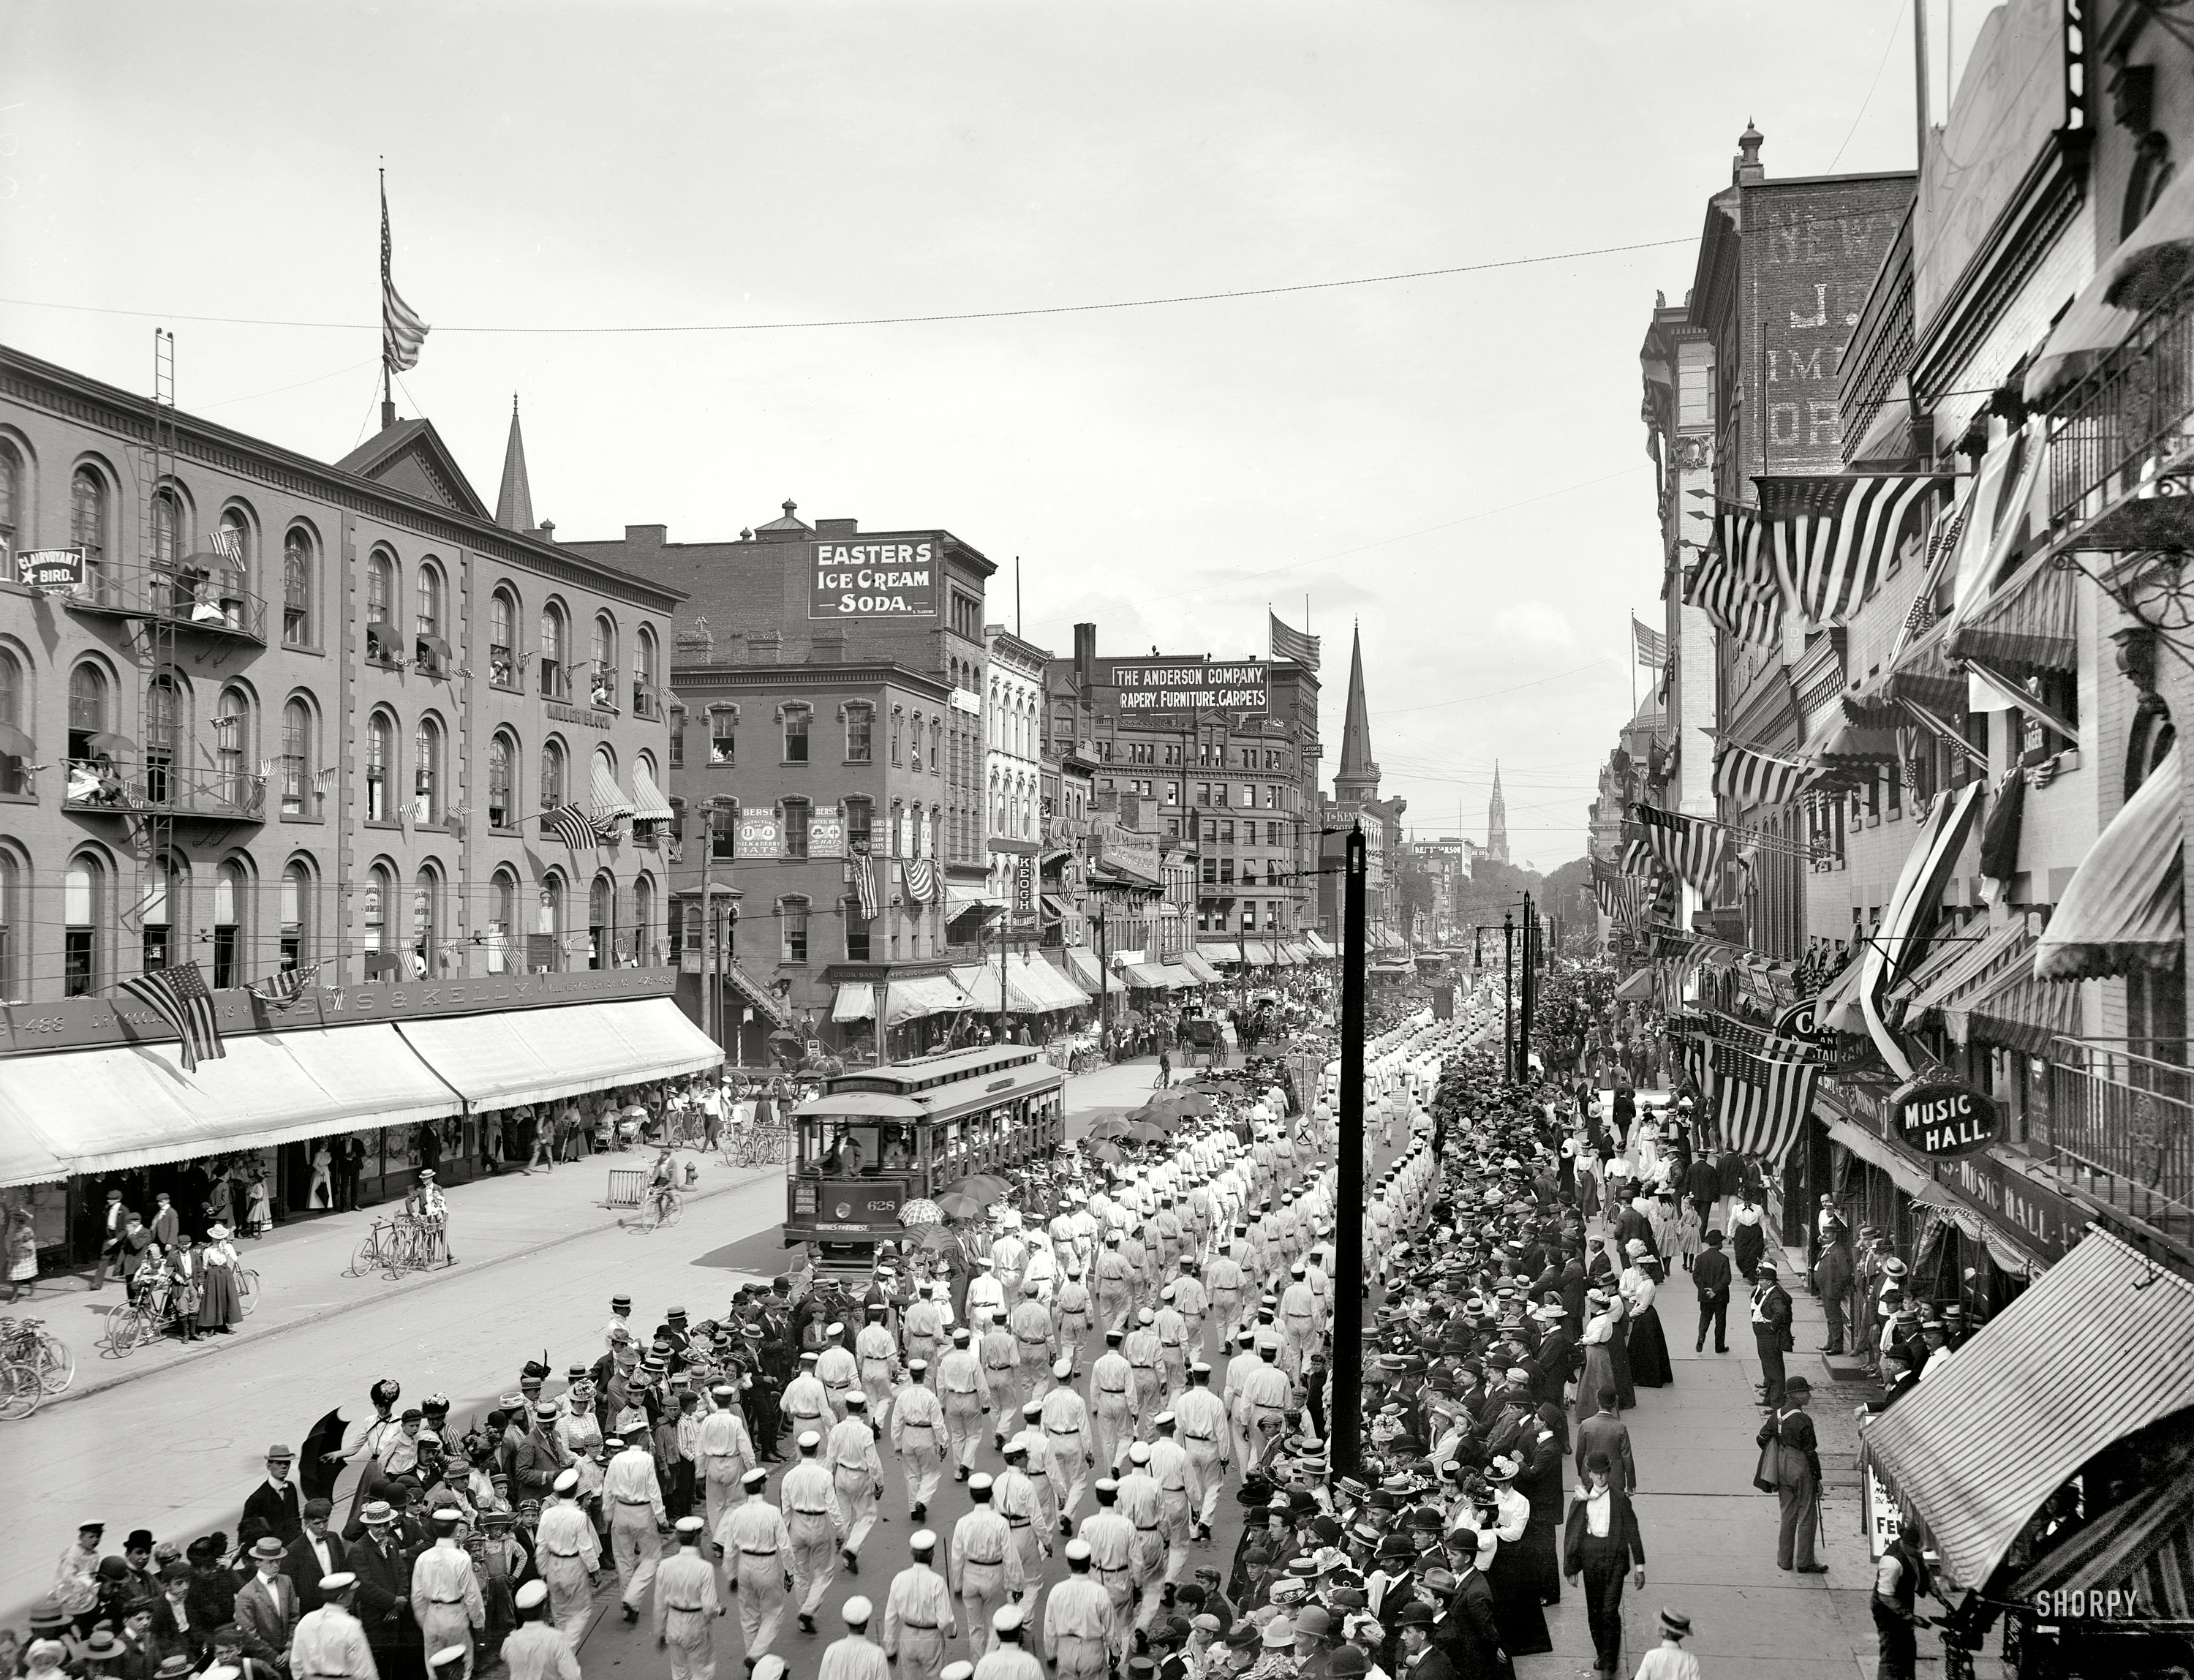 Buffalo, N.Y., 1900. "Labor Day parade, Main Street." The city's Good Humor men pass in review. 8x10 glass negative, Detroit Publishing Co. View full size.